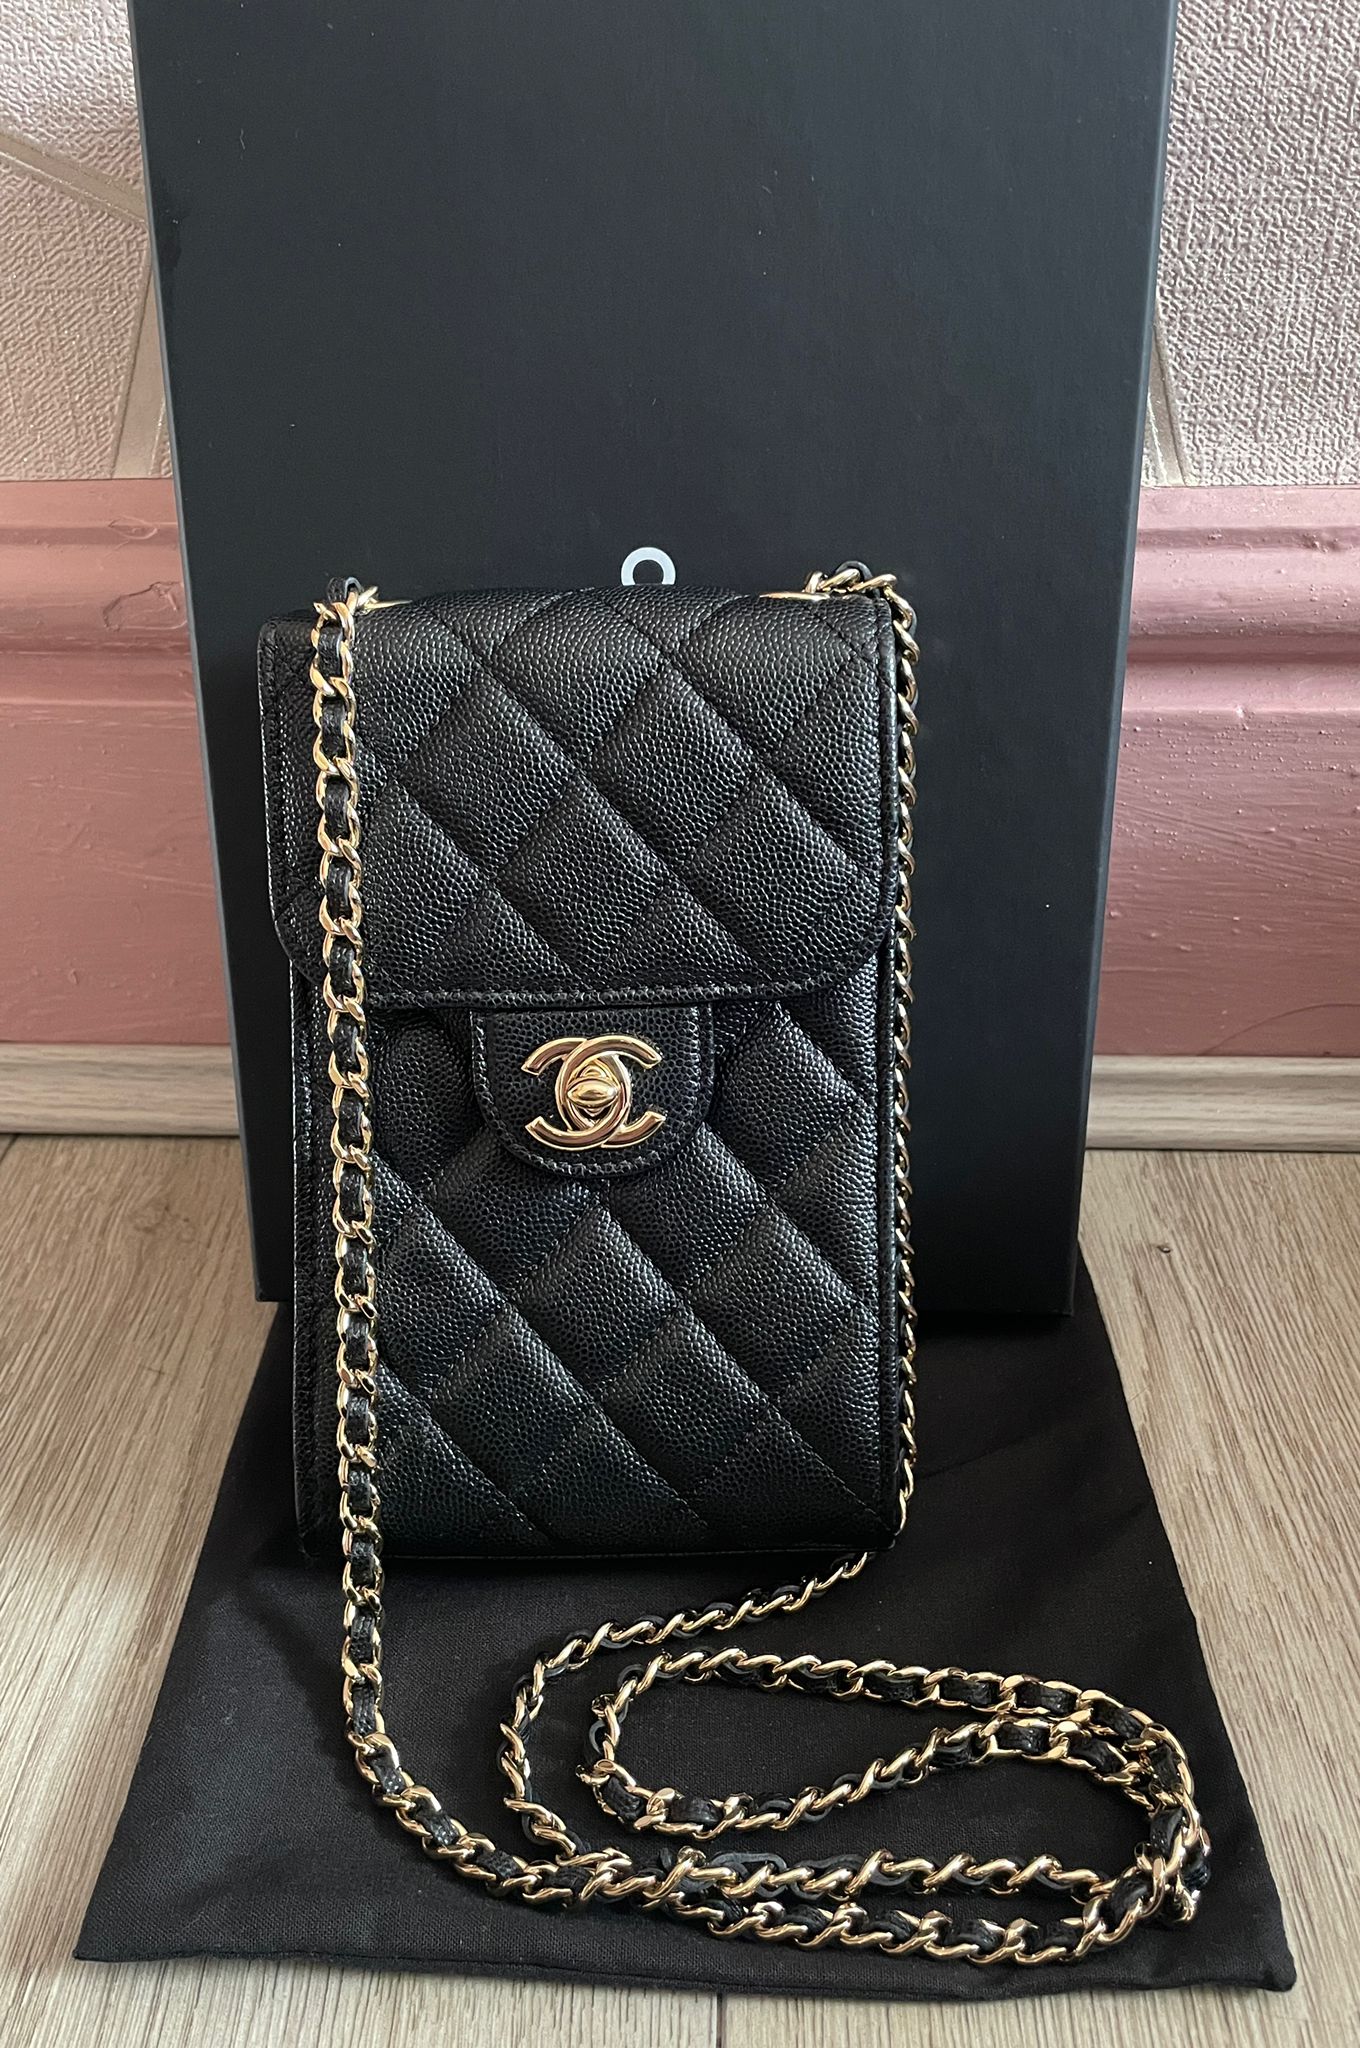 CHANEL PHONE HOLDER CLUTCH WITH CHAIN REVIEW  SAMORGA PEARL STRAPS   FashionablyAMY  YouTube